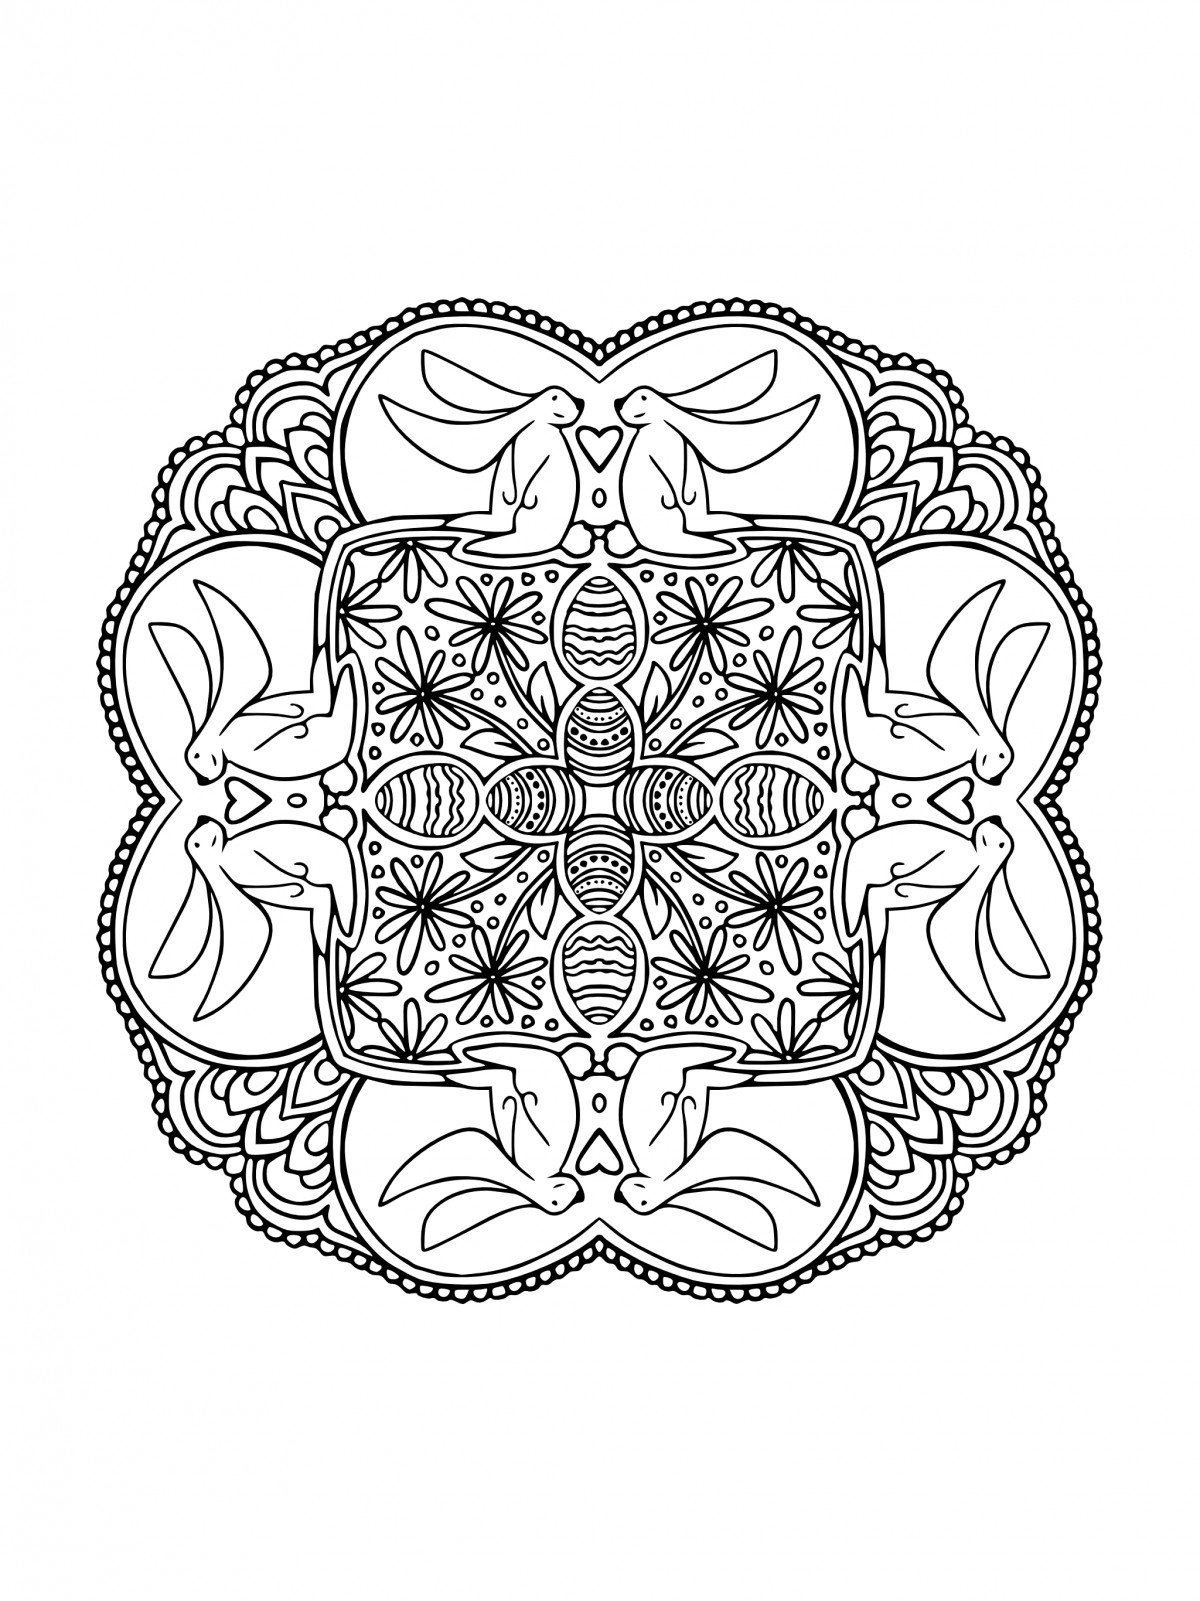 Adult Coloring Pages Printable – Easter Mandalas to color - EASTER Egg Coloring Sheet